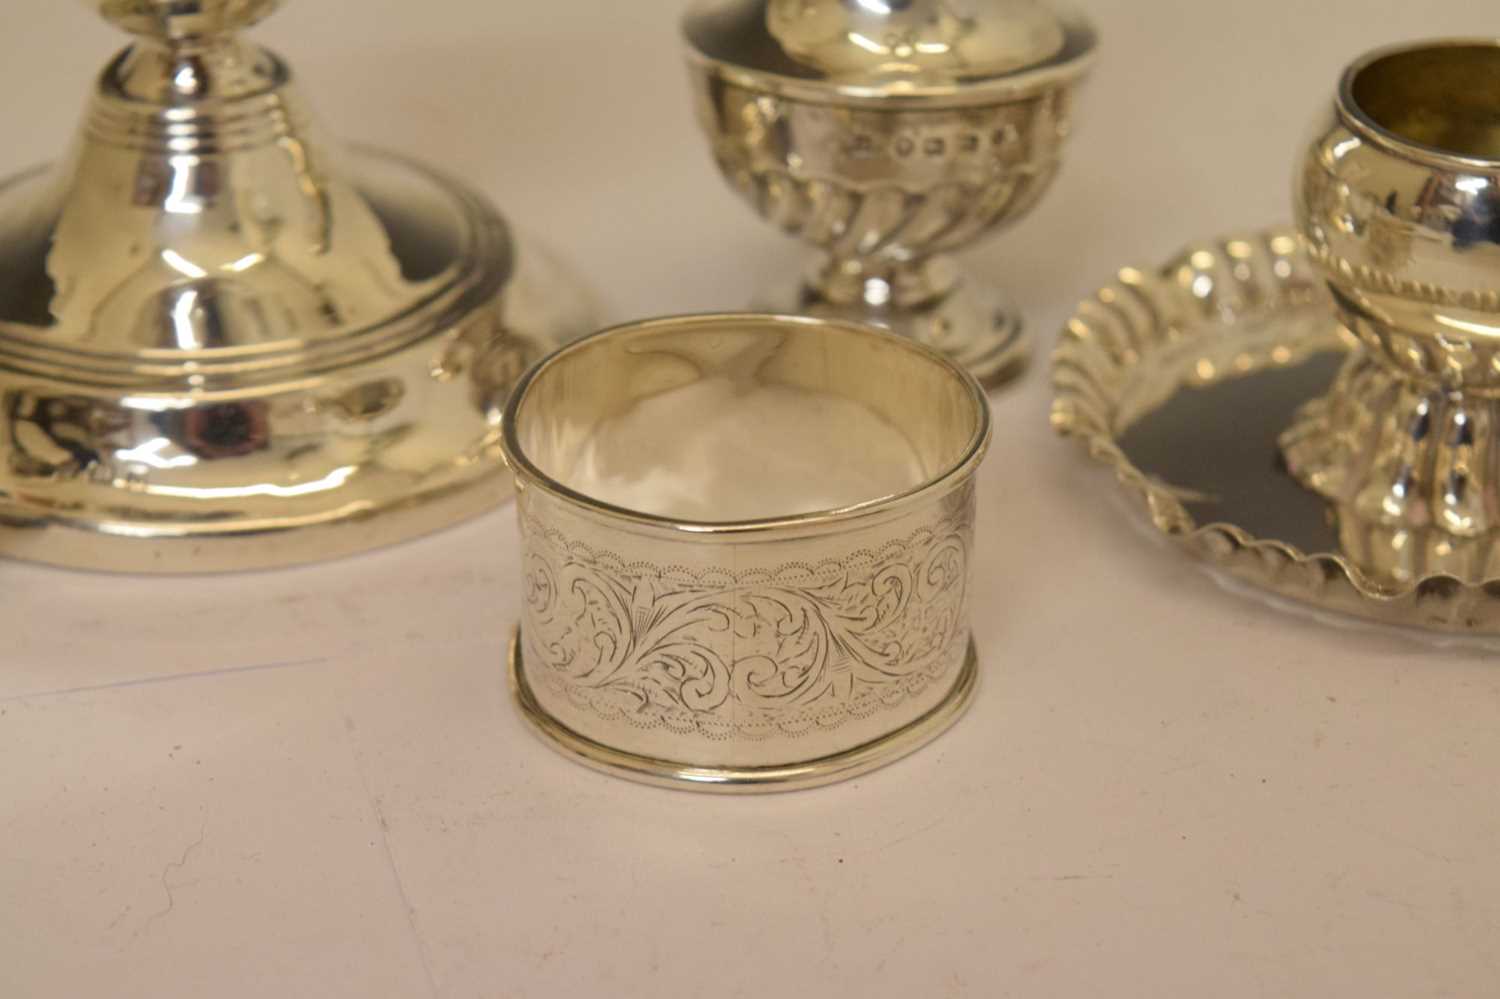 Victorian silver pepperette, silver match holder, silver matchbox sleeve, etc - Image 5 of 10